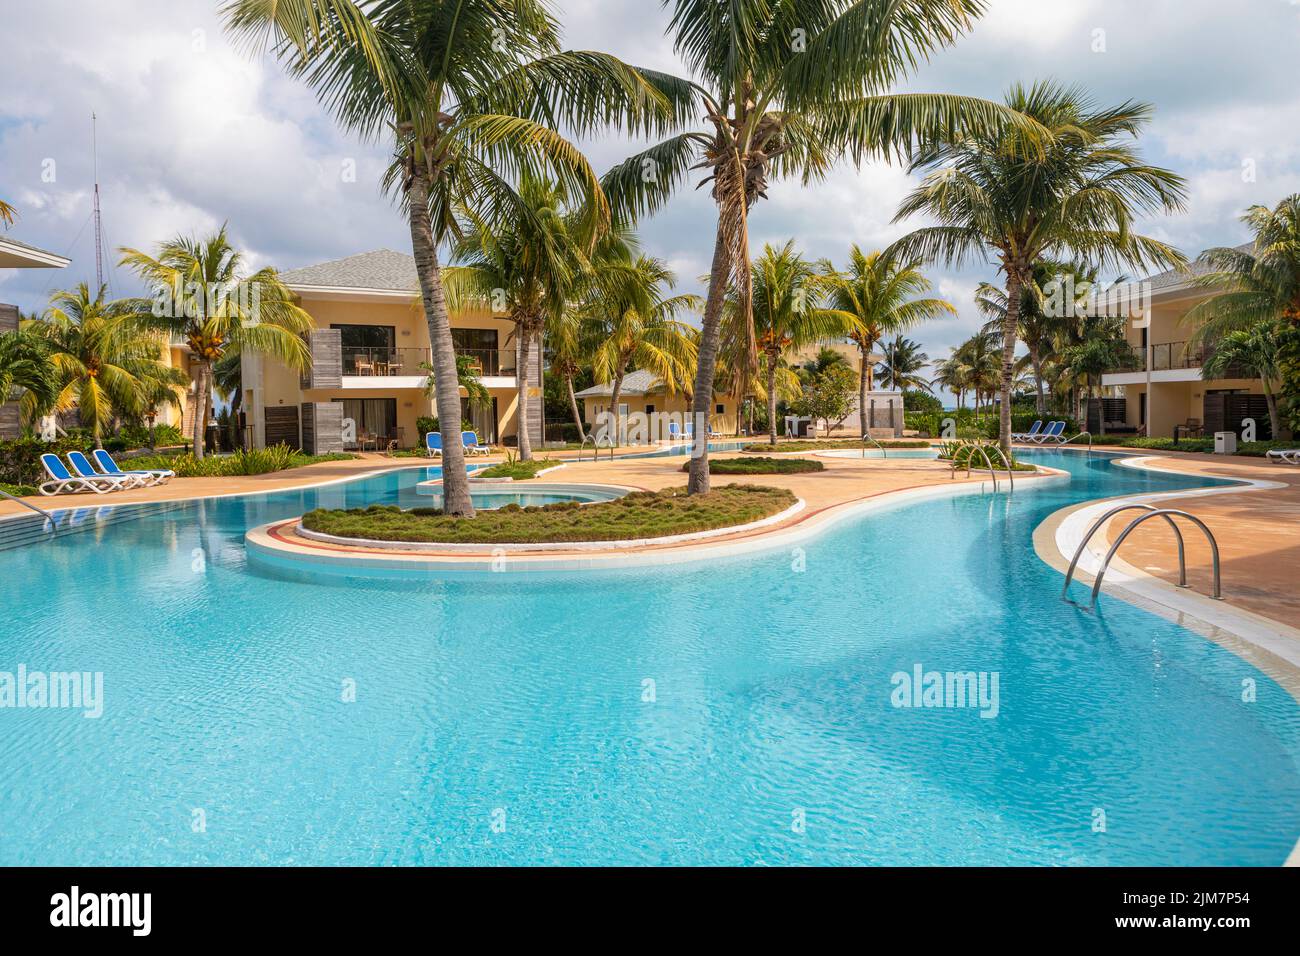 A swimming pool at a holiday resort in Cuba Stock Photo